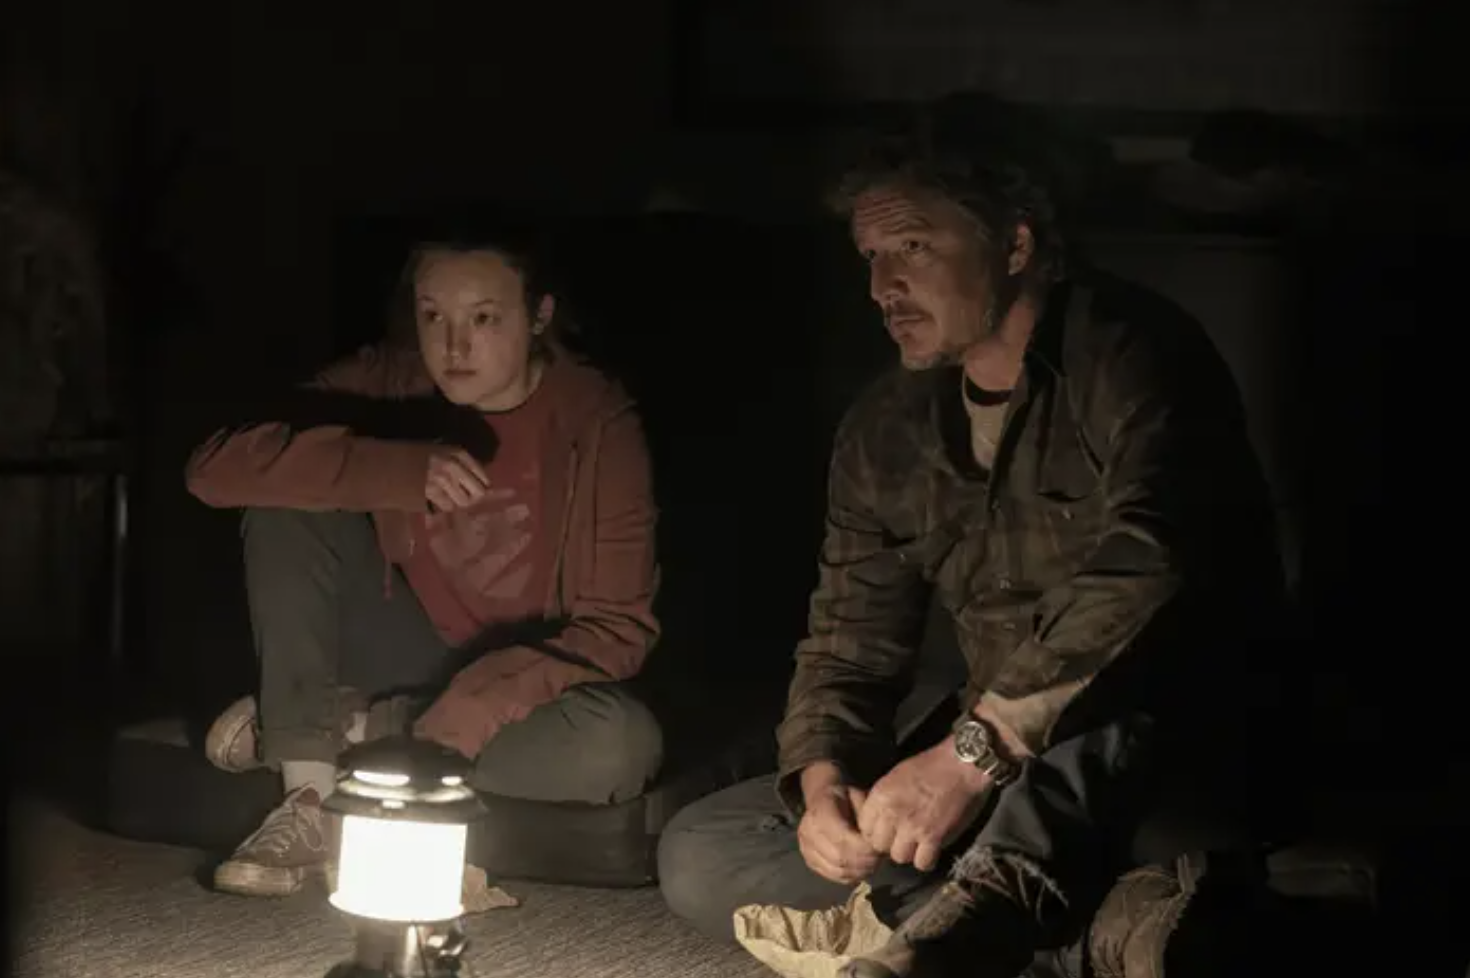 Actors Pedro Pascal and Bella Ramsey sit on the floor by a single lantern